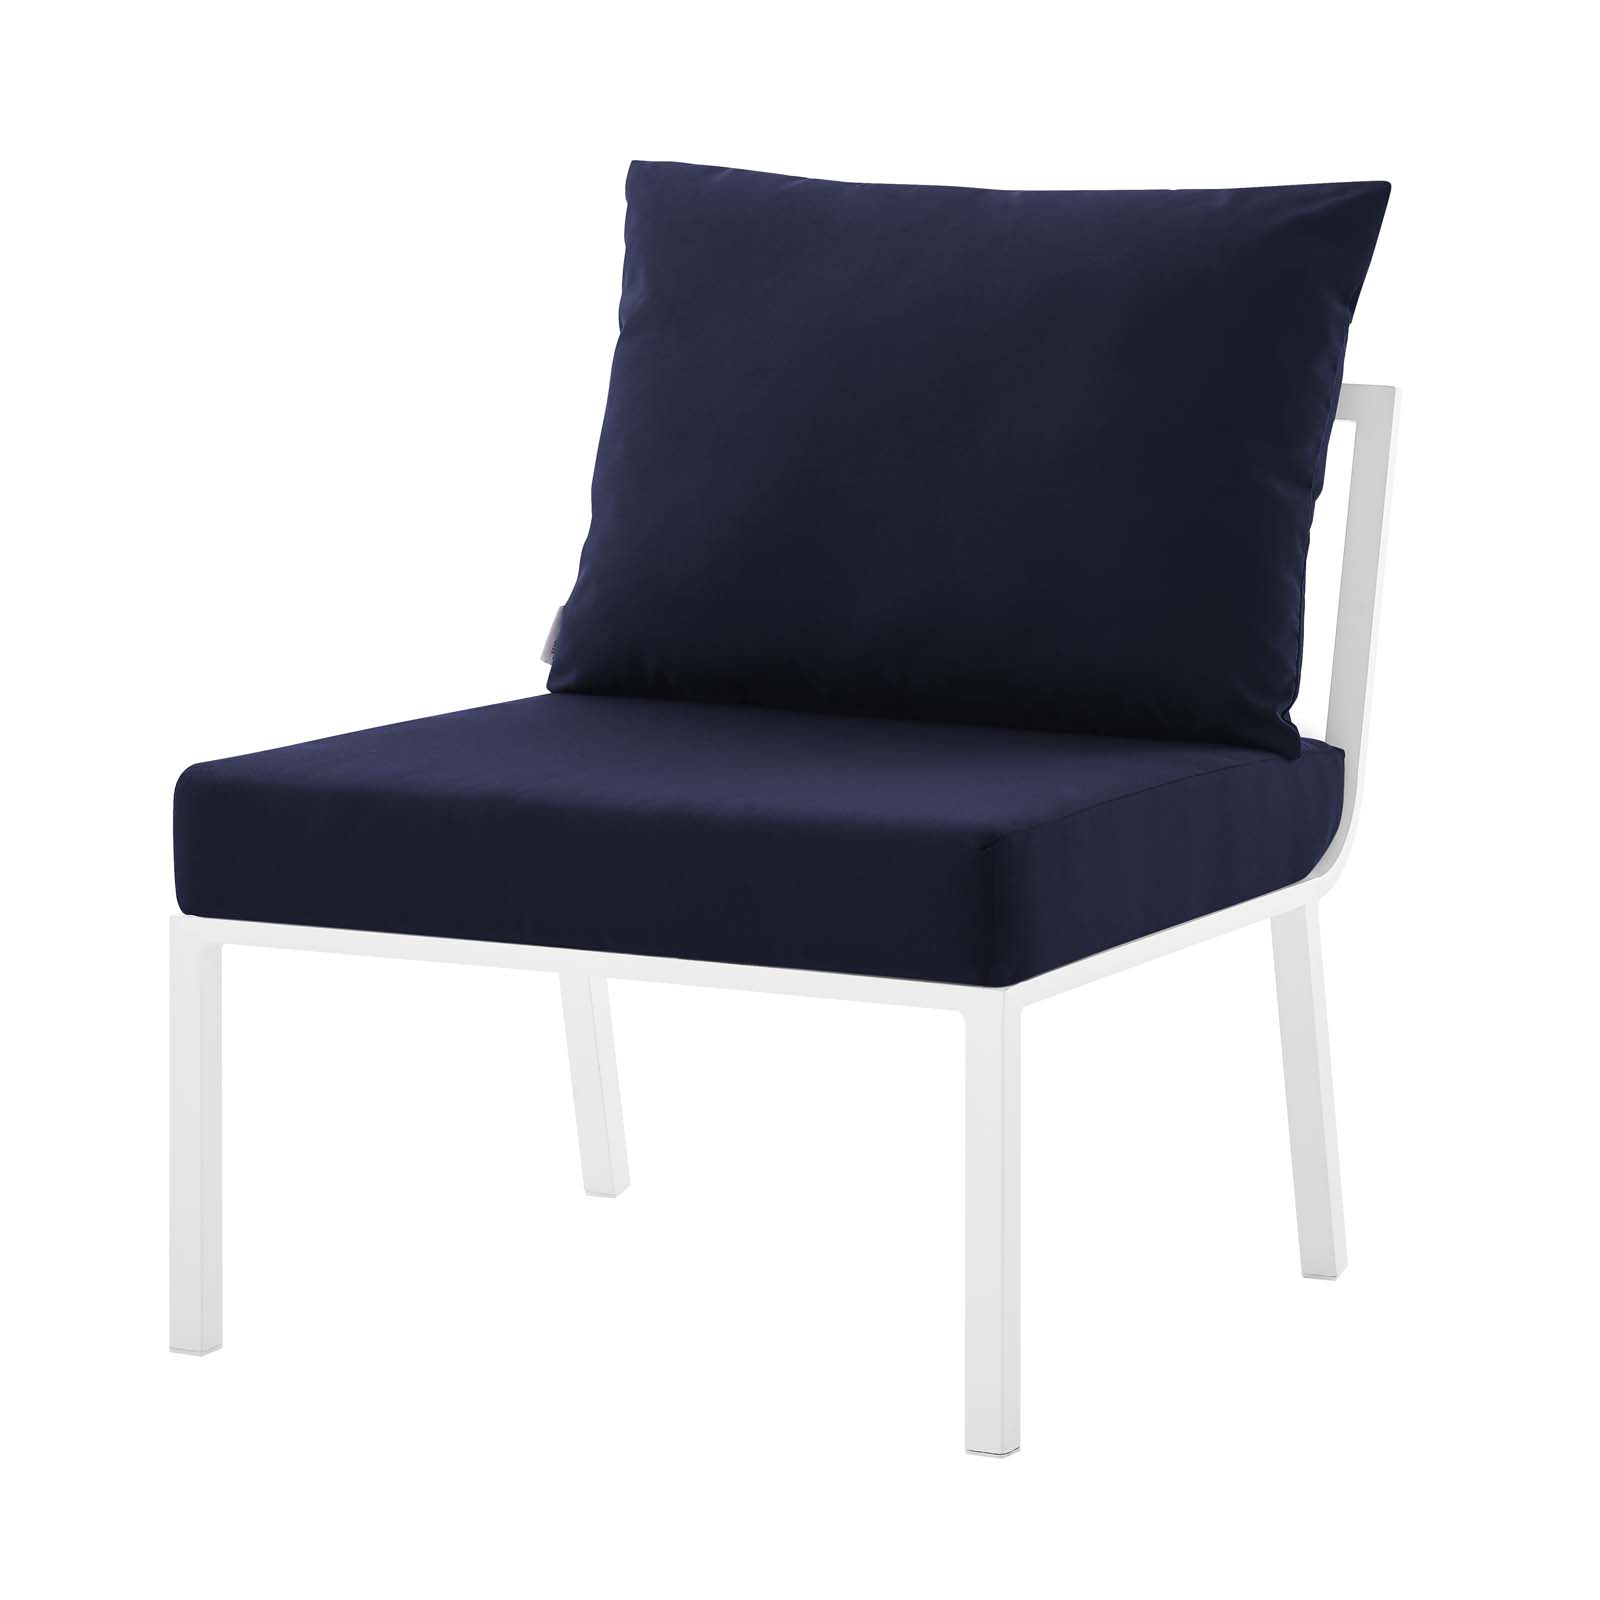 Lounge Sectional Sofa Chair Set, Aluminum, Metal, Steel, White Blue Navy, Modern Contemporary Urban Design, Outdoor Patio Balcony Cafe Bistro Garden Furniture Hotel Hospitality - image 3 of 10